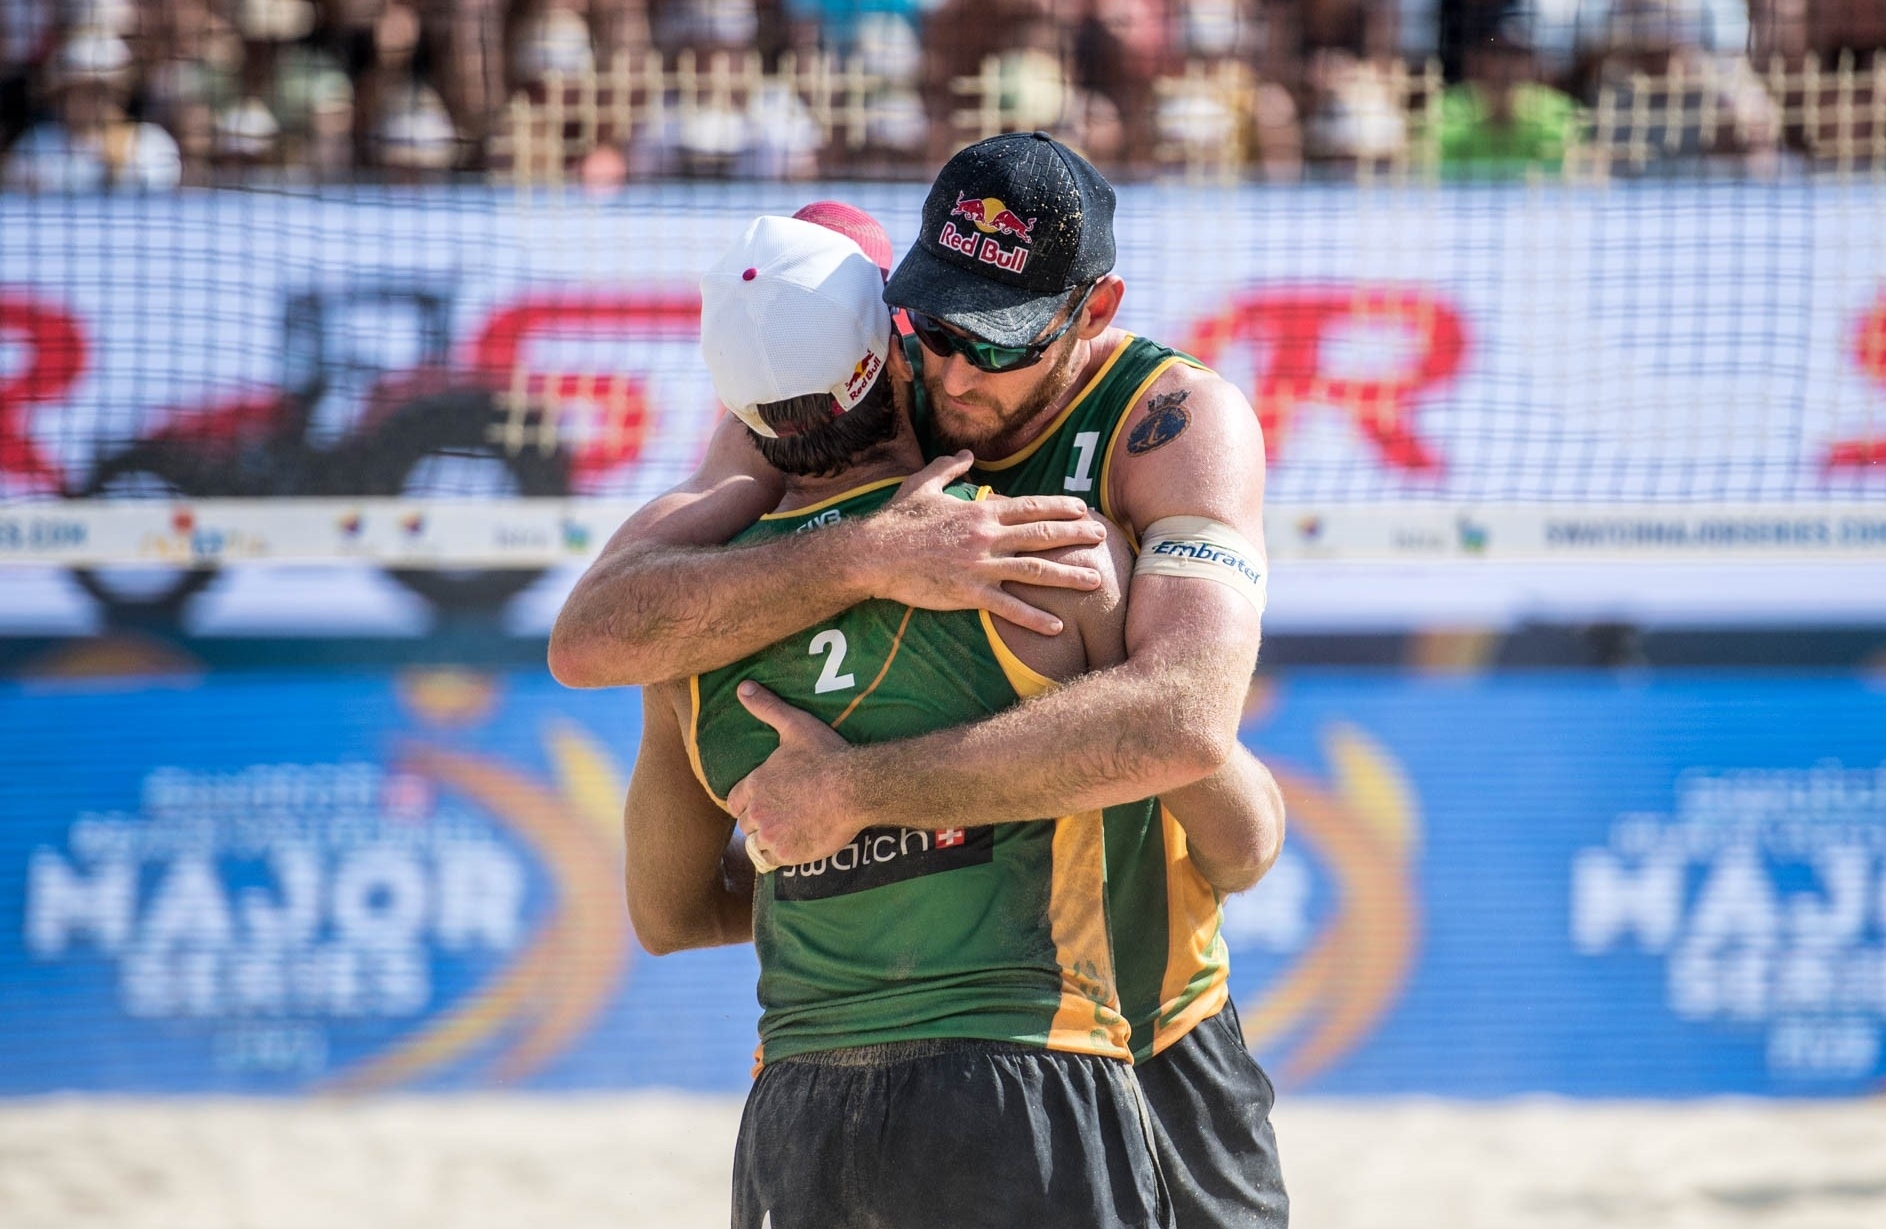 Alison/Bruno hug it out after their incredible victory. Photocredit: Pedrag Vuckovic.